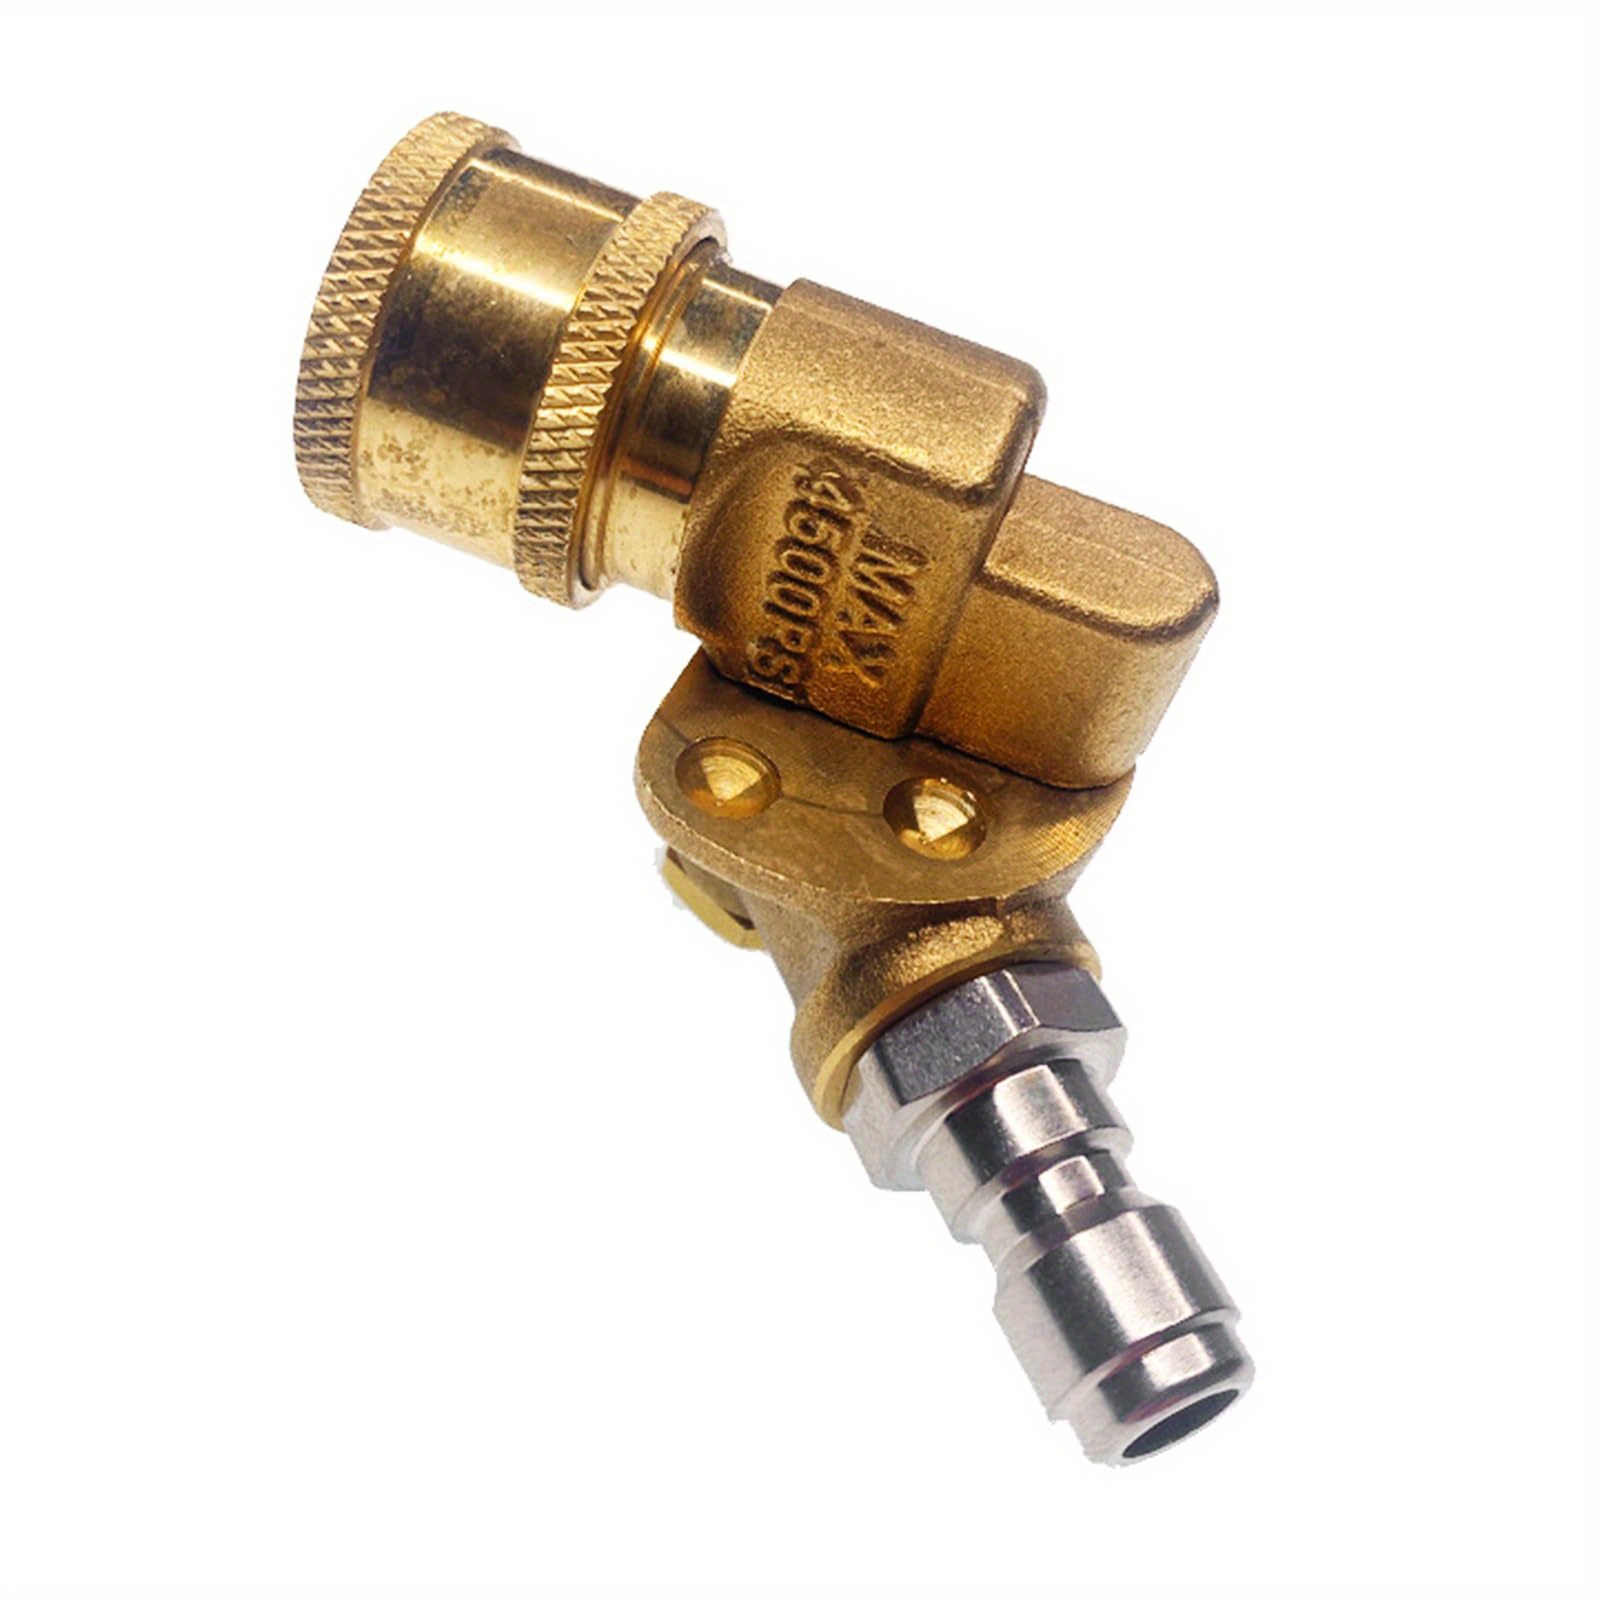 

1pc Rotating Coupler With 1/4" 5-gear Adjustable Connector, Quick Connect High Pressure Washer Accessory, 180 Degree Rotation, All-copper Female Head, 12mm Interface, For Car Cleaning